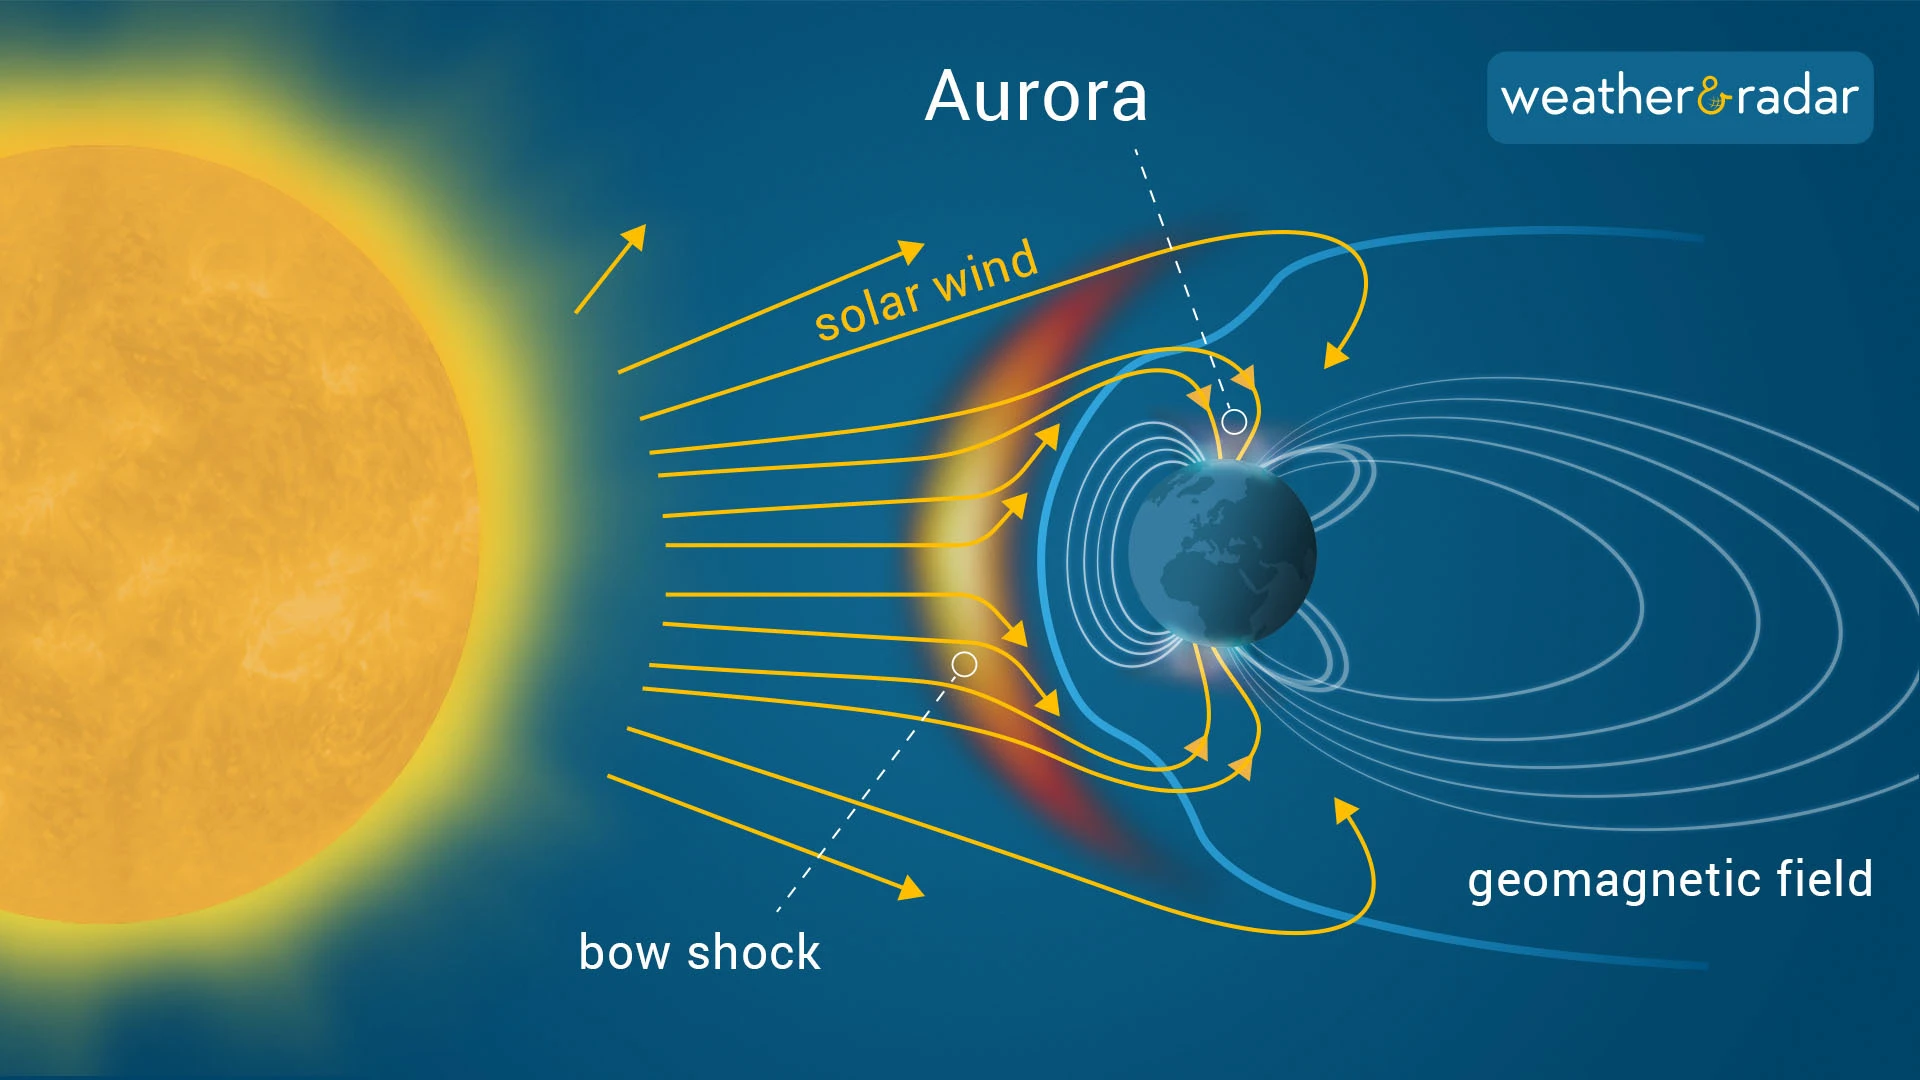 As the solar wind approaches Earth, it encounters a shock wave known as a bow shock, where the wind interacts with our Earth's magnetic field.